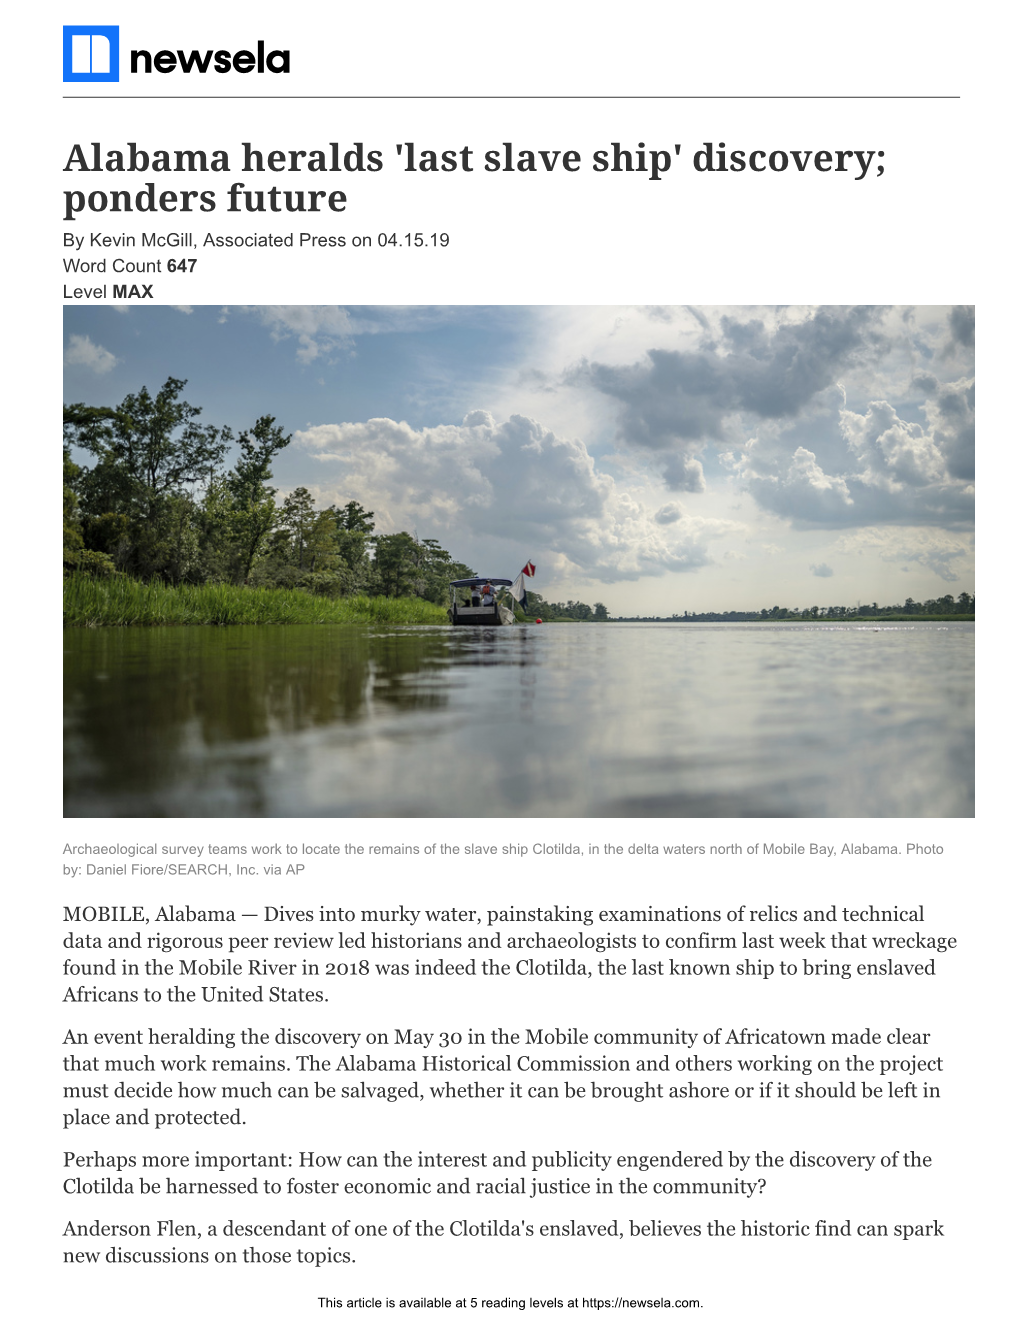 Alabama Heralds 'Last Slave Ship' Discovery; Ponders Future by Kevin Mcgill, Associated Press on 04.15.19 Word Count 647 Level MAX